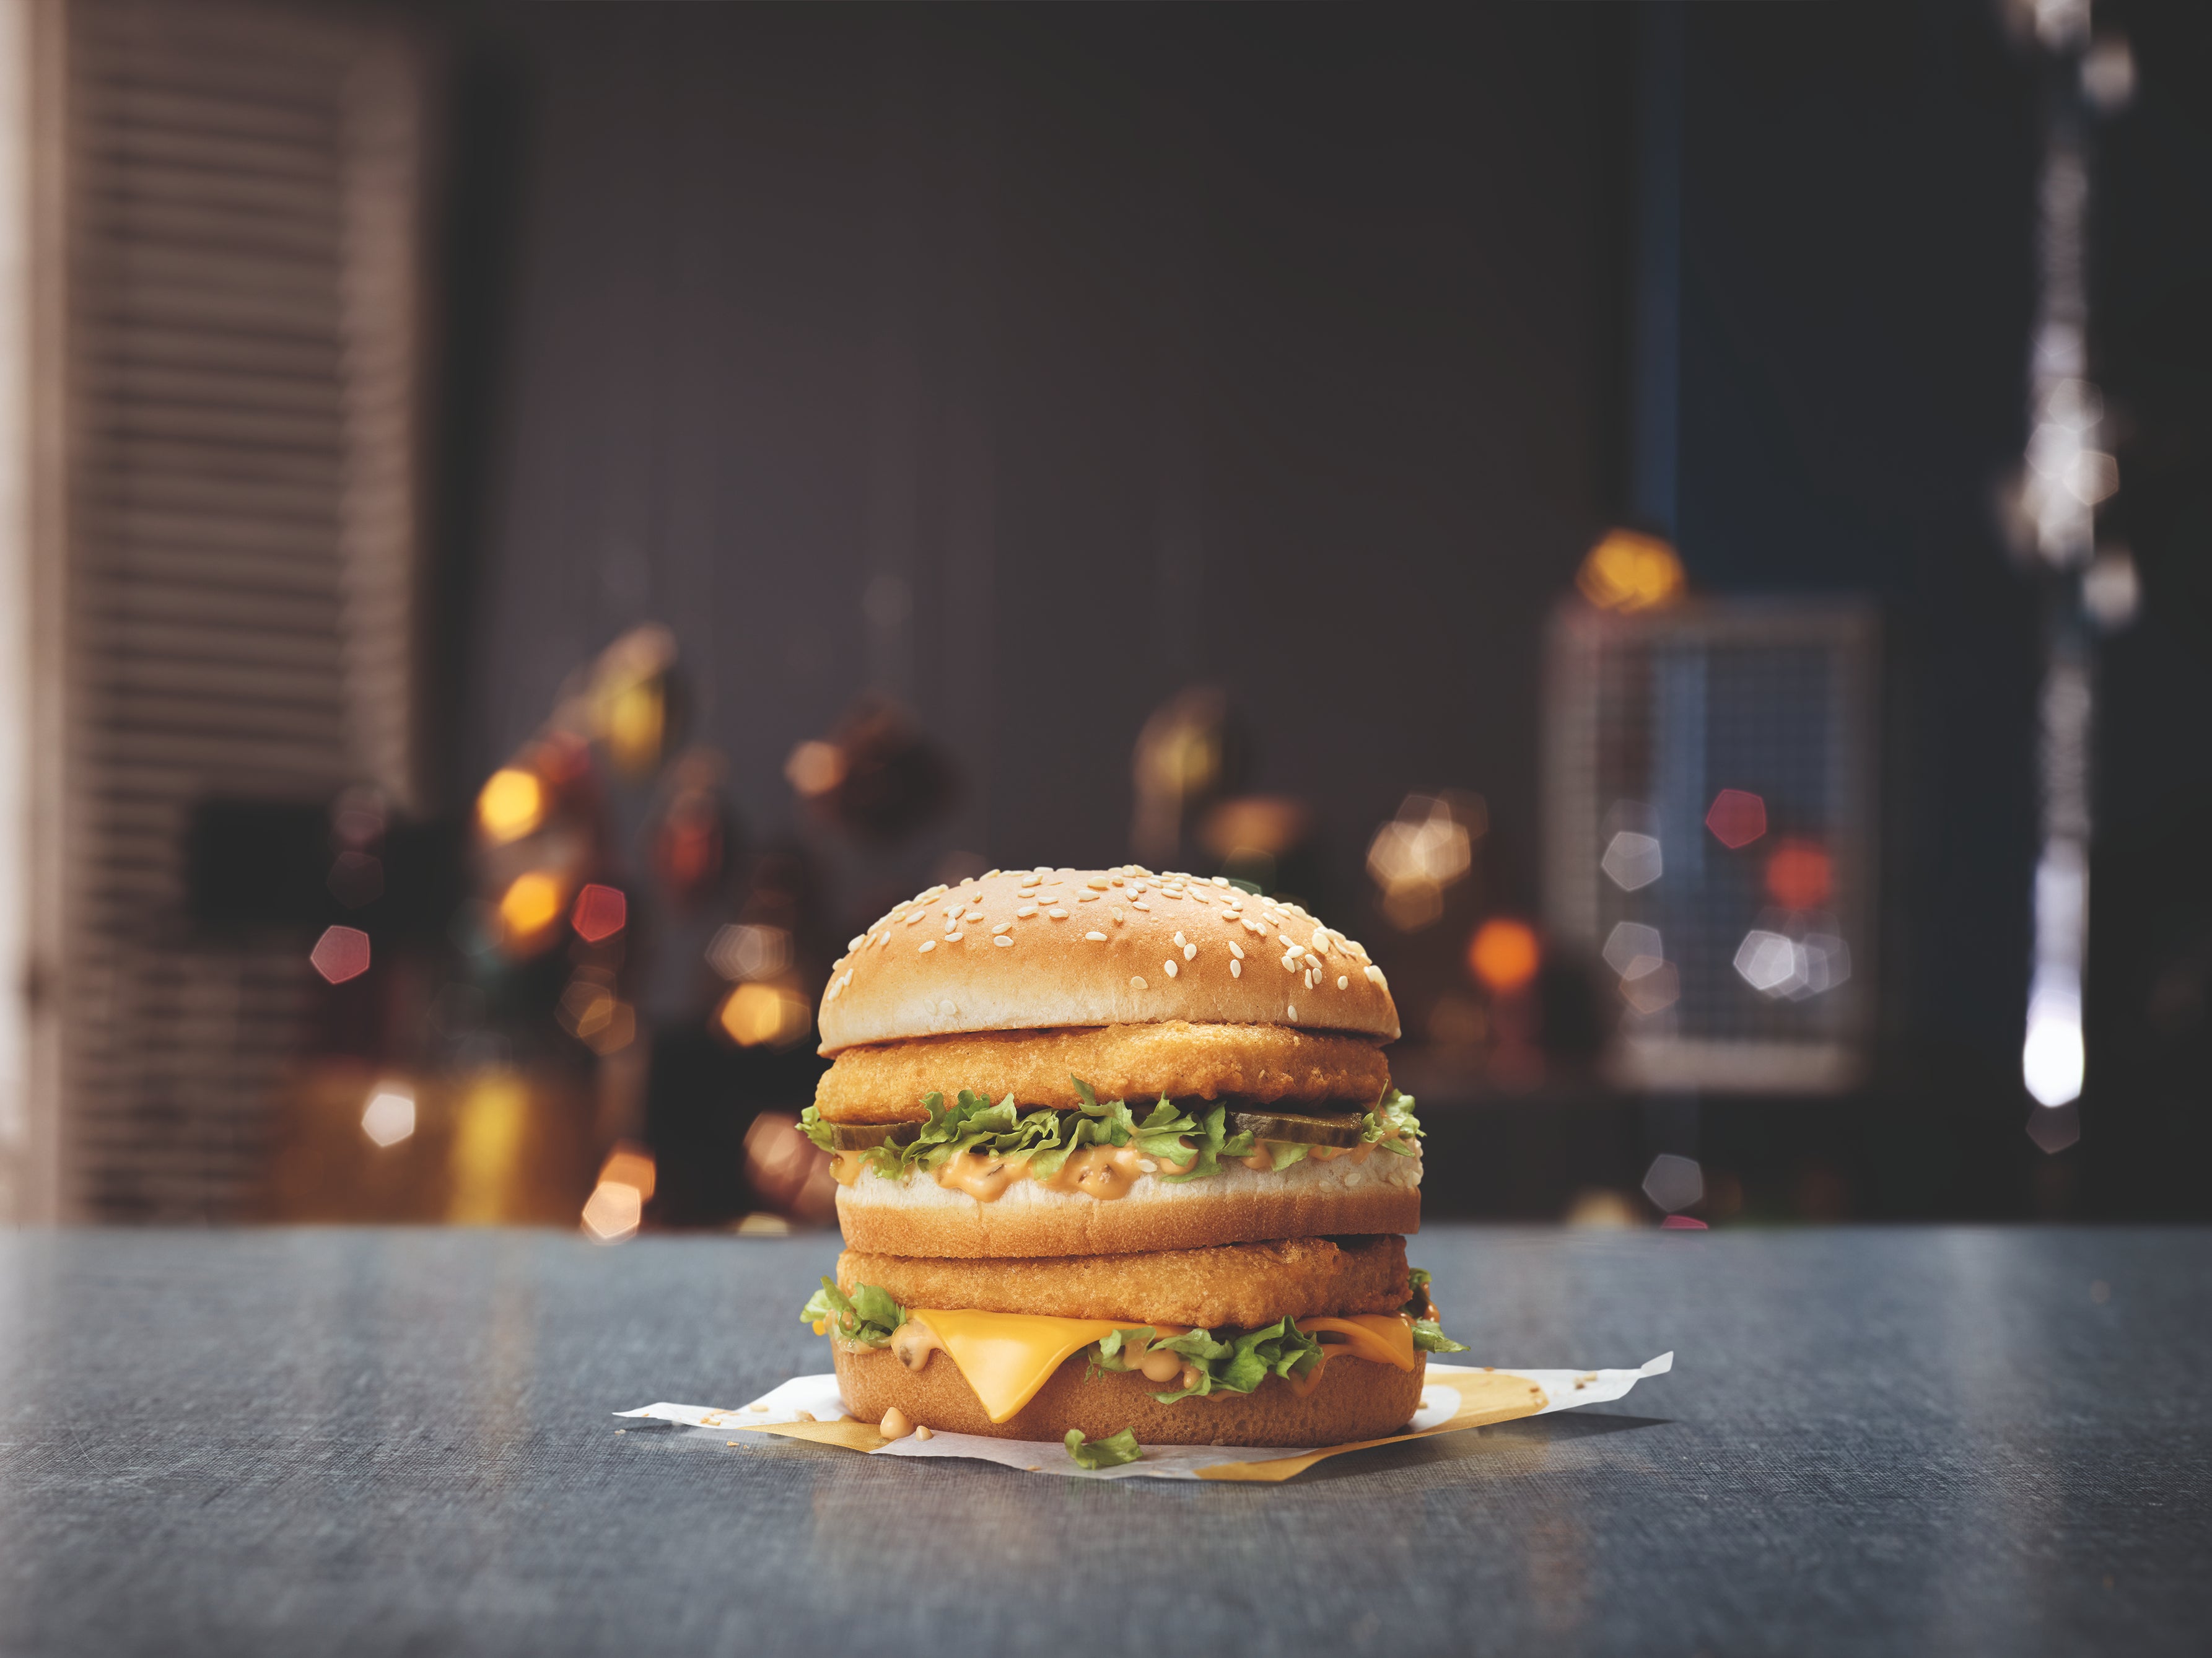 The chicken Big Mac is launching for a limited time in McDonald’s restaurants in the UK